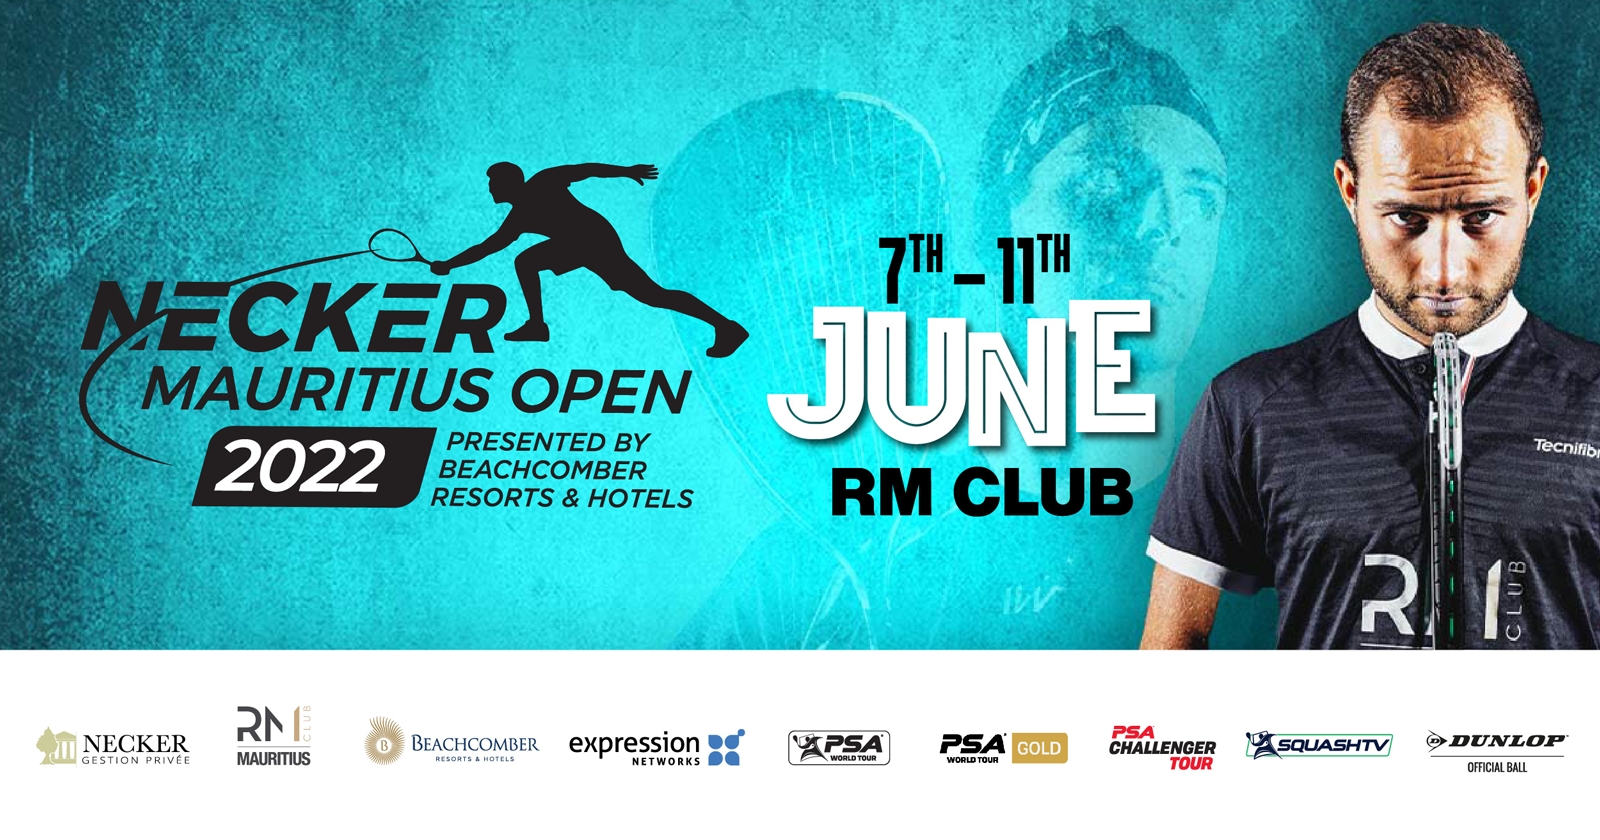 Necker Mauritius Open 2022 presented by Beachcomber Resorts & Hotels